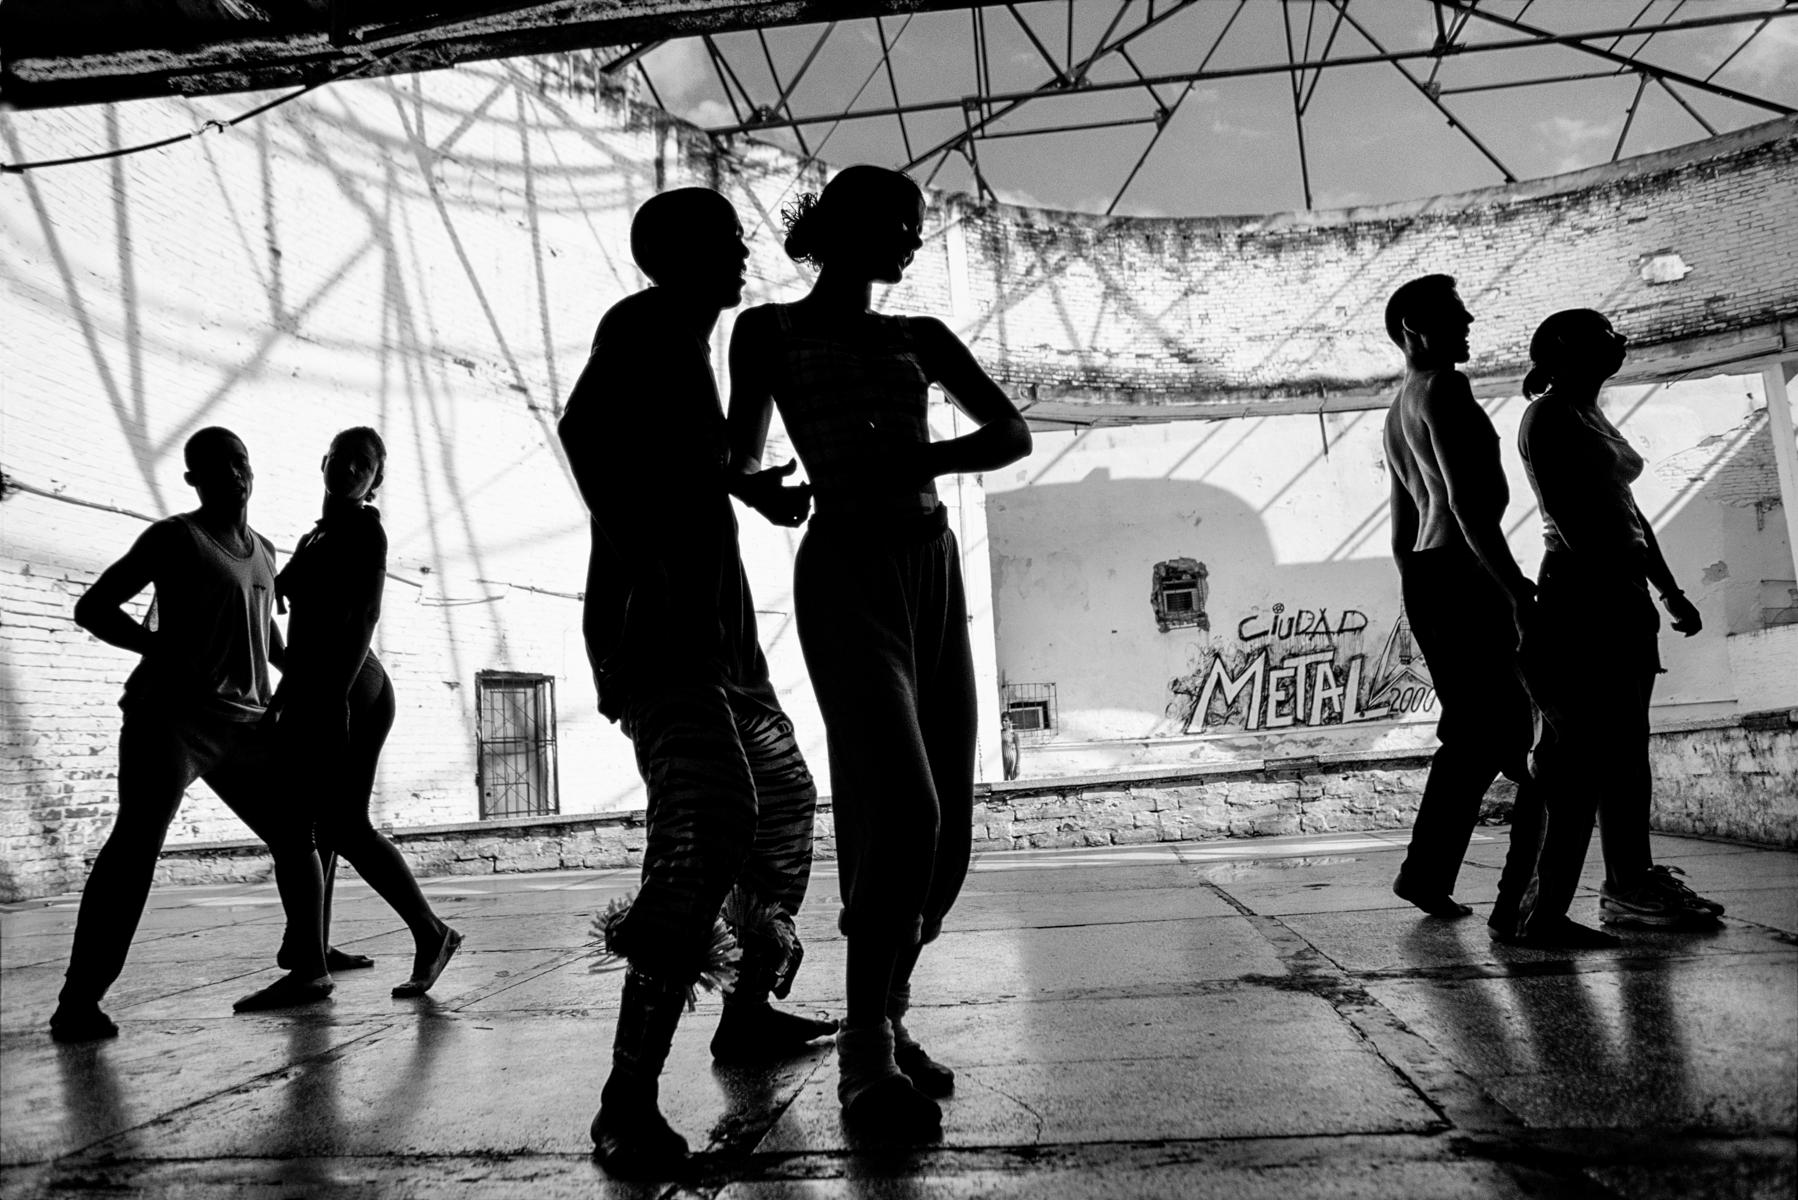 La telaraña or “spider’s web” was taken in a dance school in Santa Clara, Cuba. The dance symbolised the relationship between man and woman… the man flirting, the woman turning away whilst subtlely drawing him into her web.

James Sparshatt’s